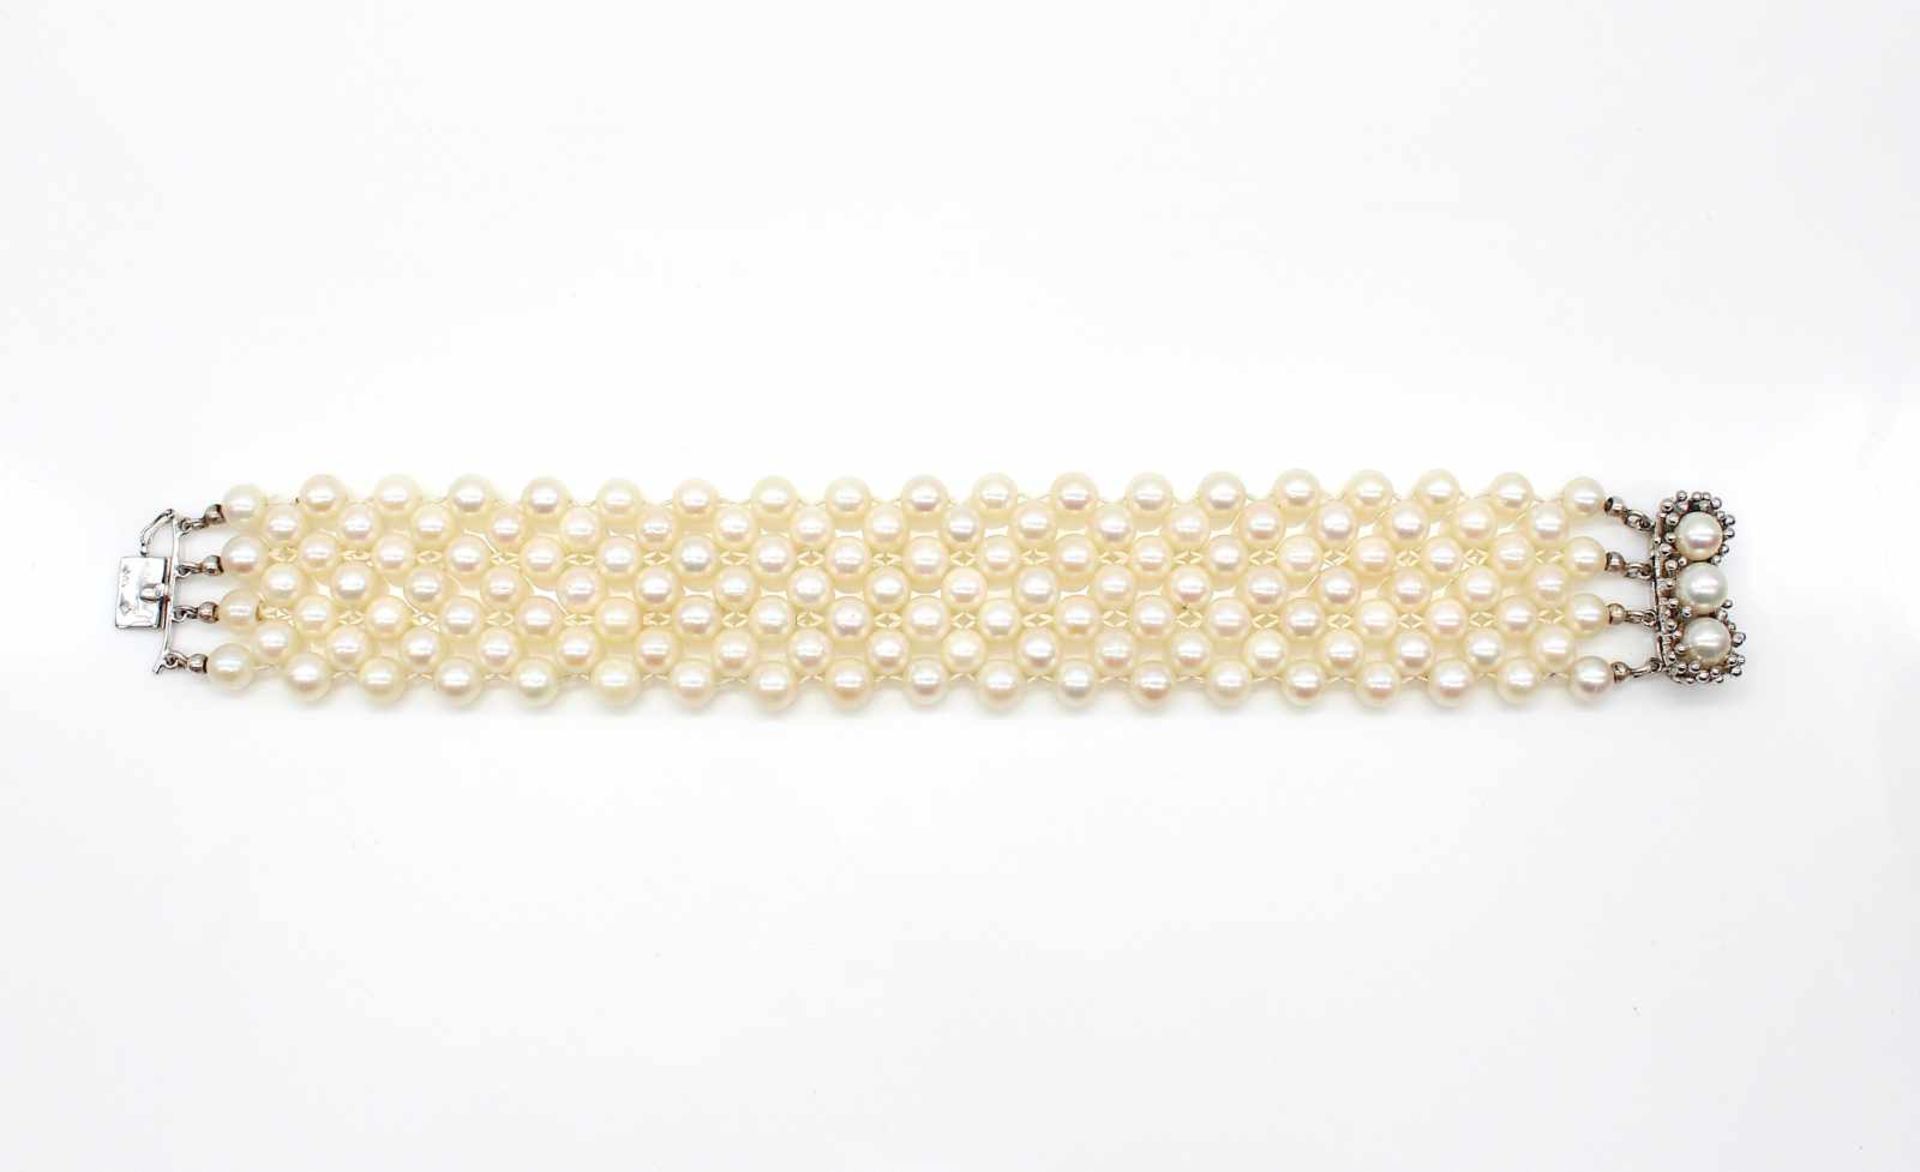 Bracelet made of cultured pearls with a lock made of 585 white gold.weight 53,2 g, length 20 - Bild 2 aus 3